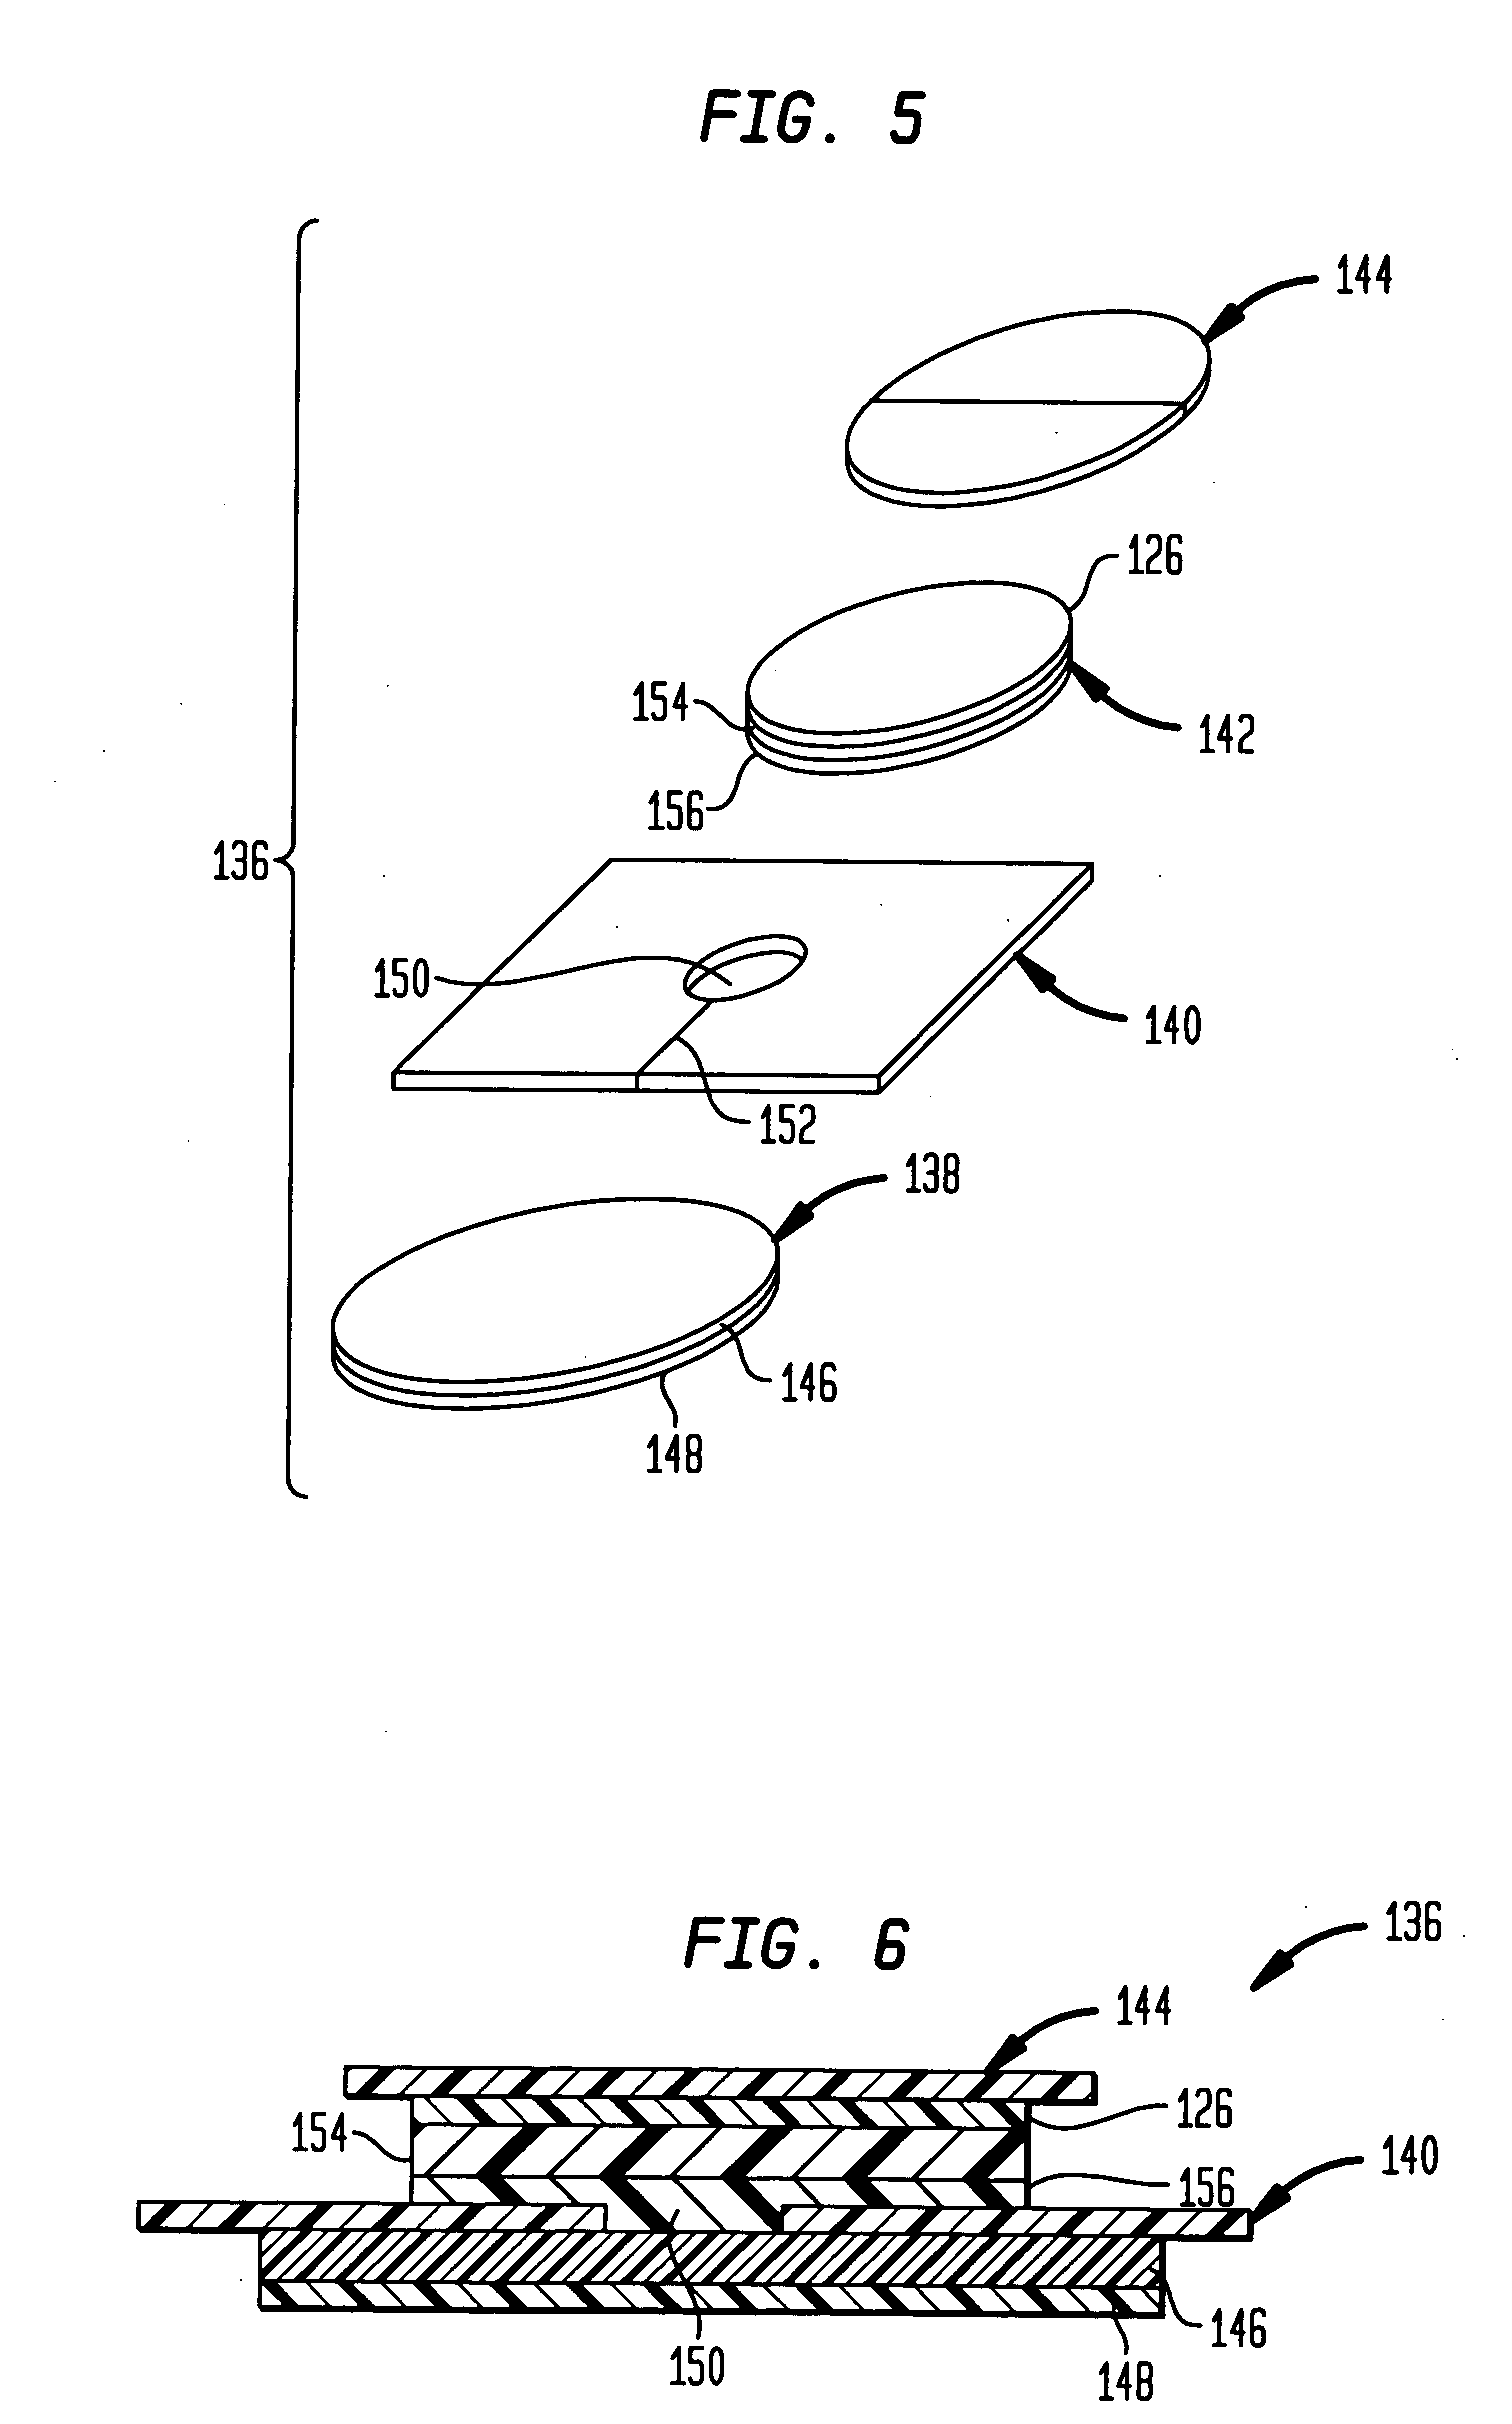 Transdermal patch incorporating active agent migration barrier layer